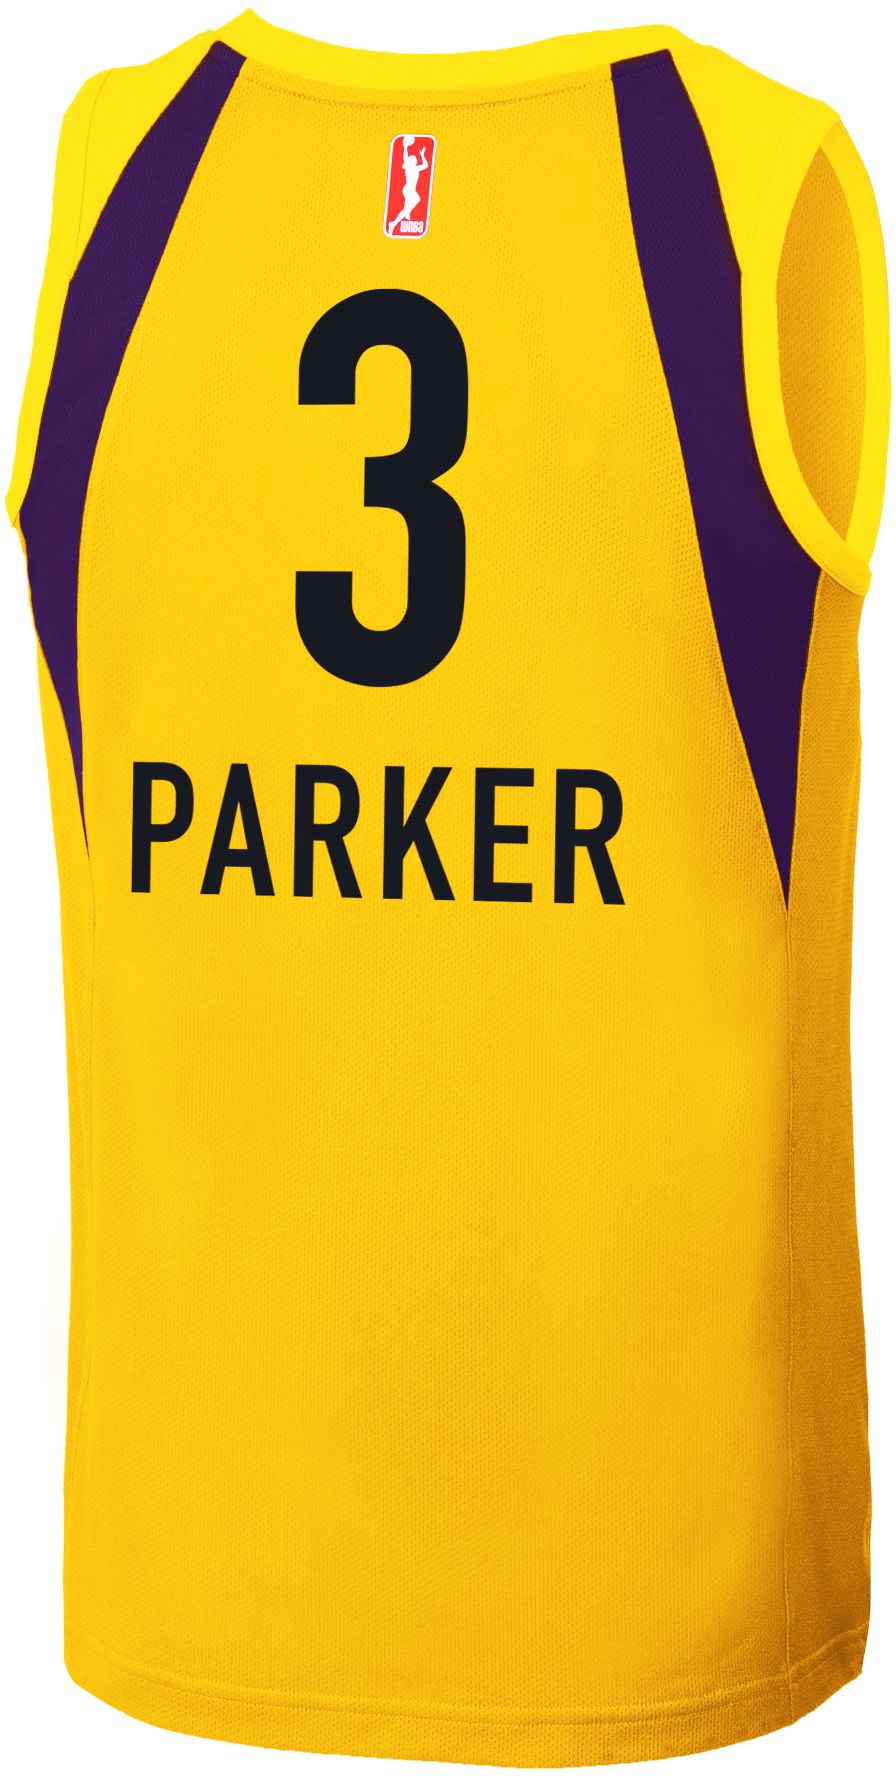 candace parker jersey for sale